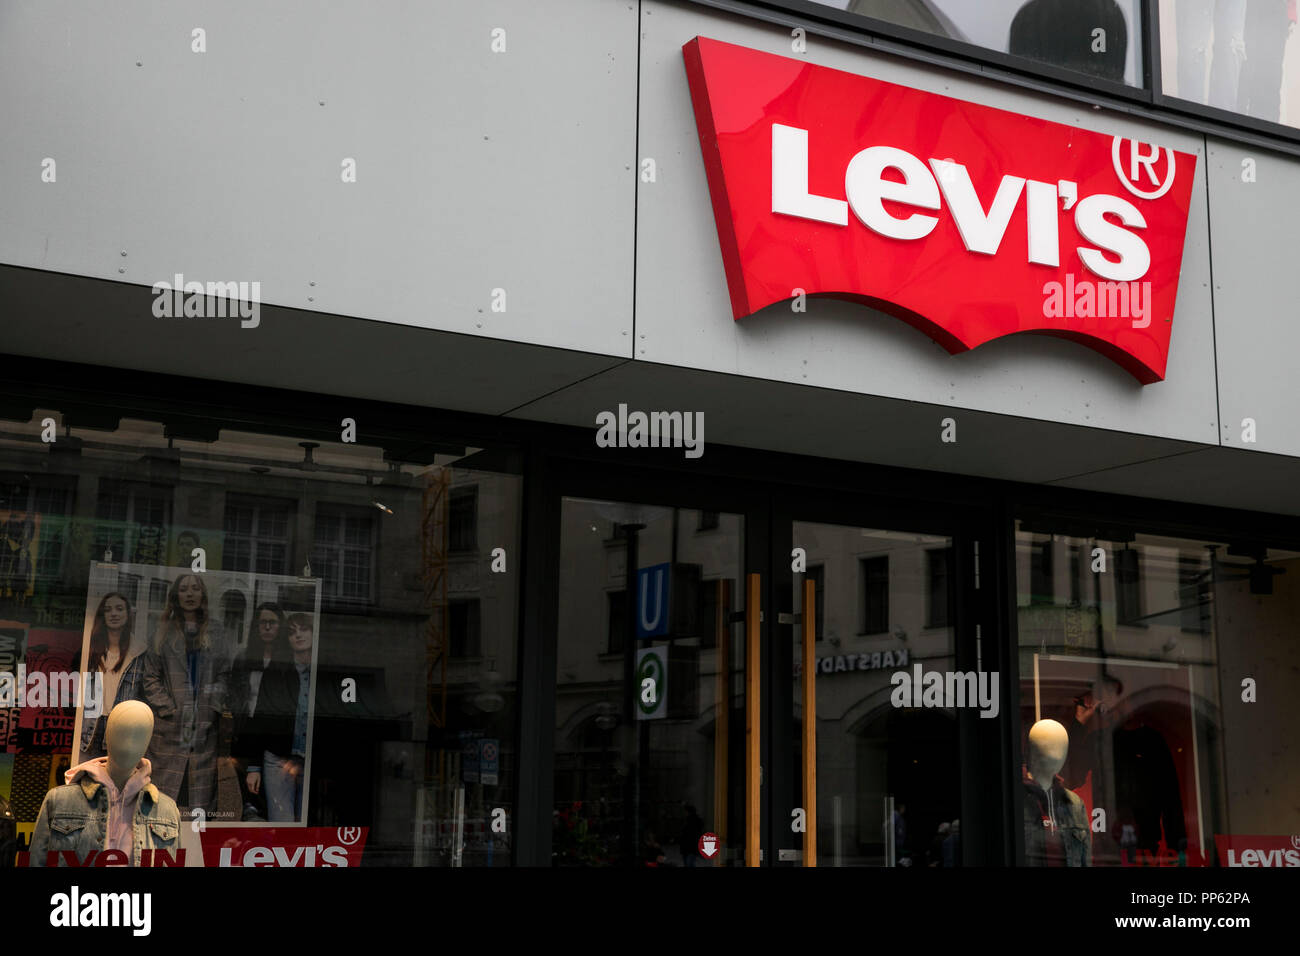 Levis Store Sign High Resolution Stock Photography and Images - Alamy